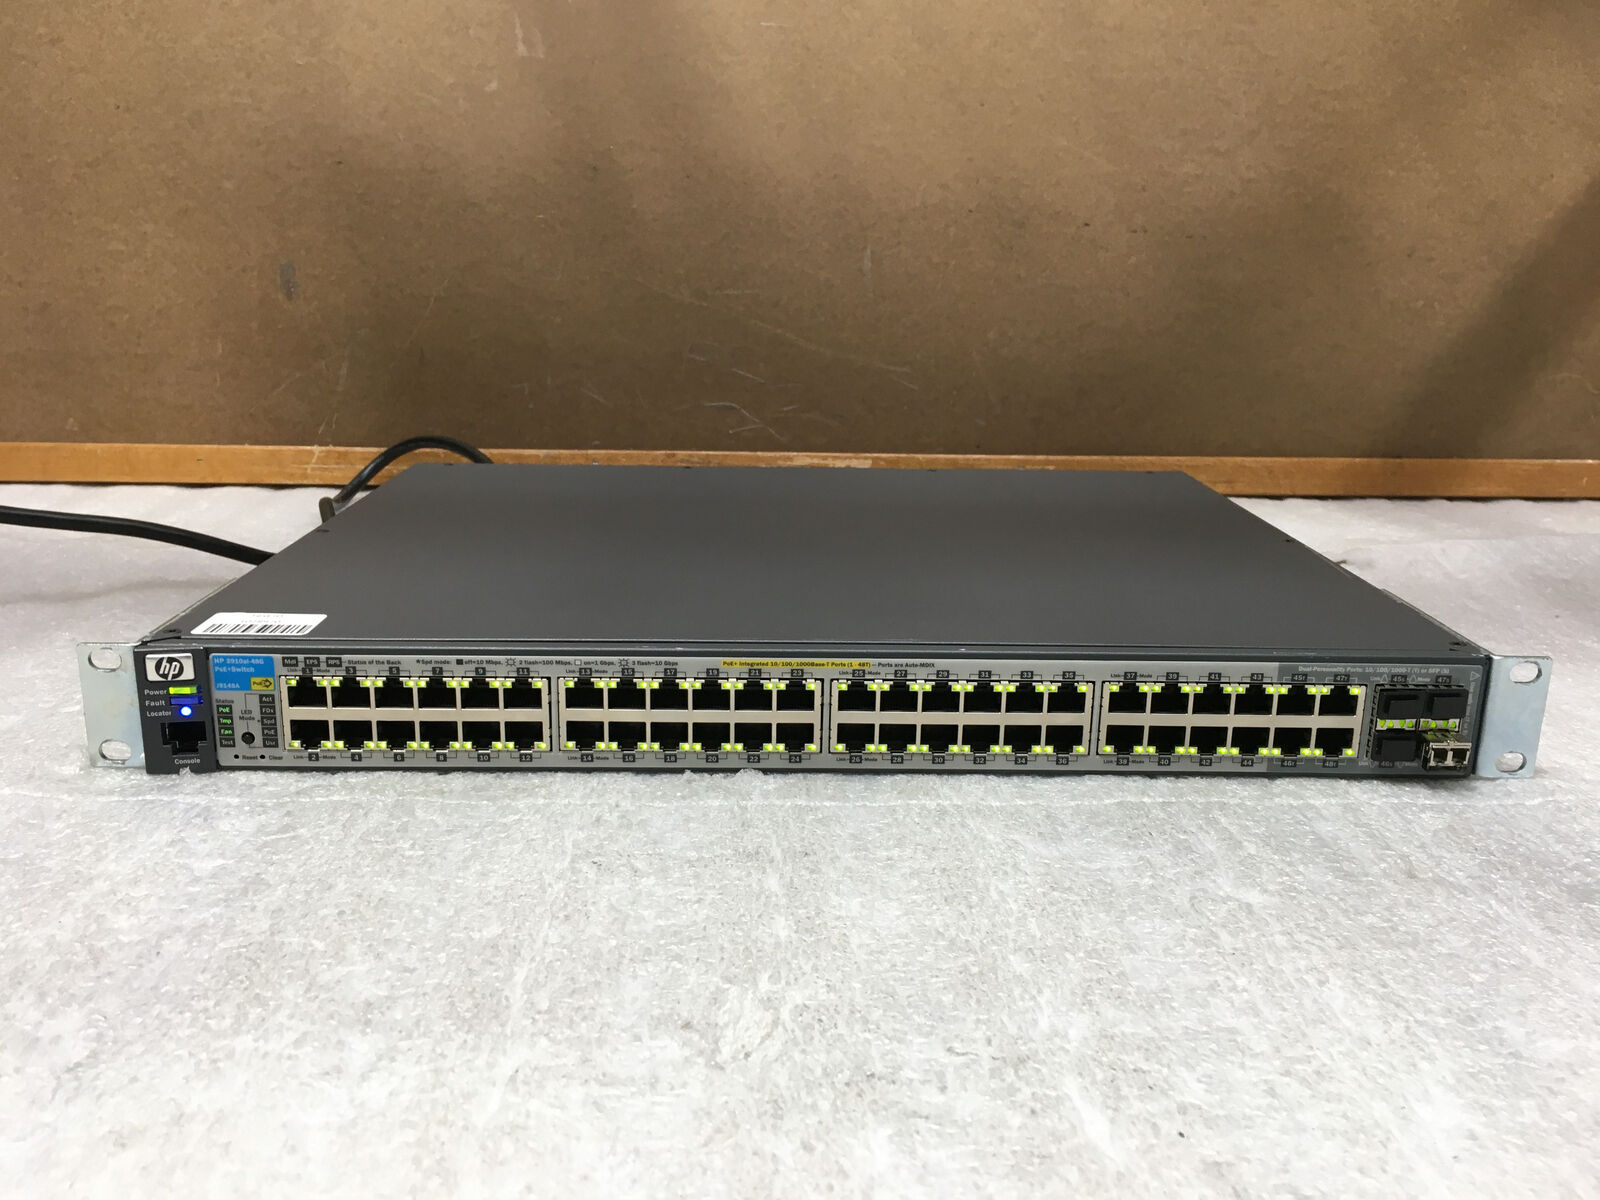 HP 2910al-48G J9148A Fully Managed PoE+ 48 Port Network Switch --TESTED/RESET